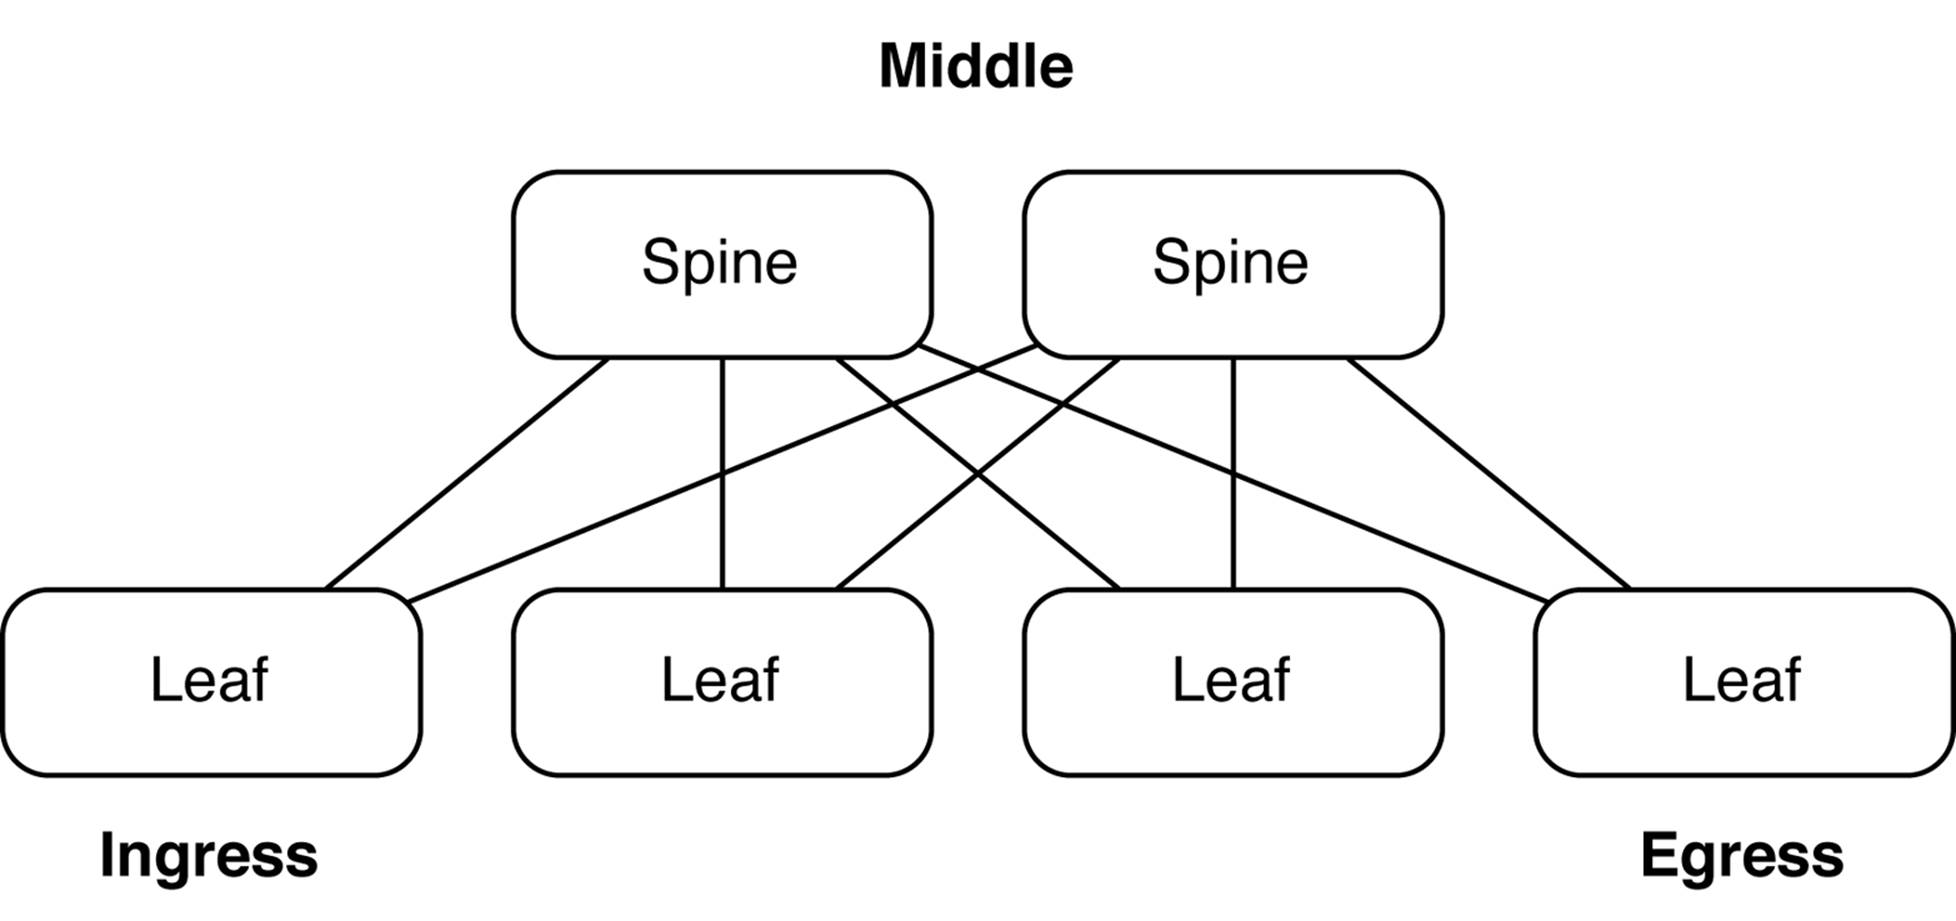 Spine-and-leaf topology